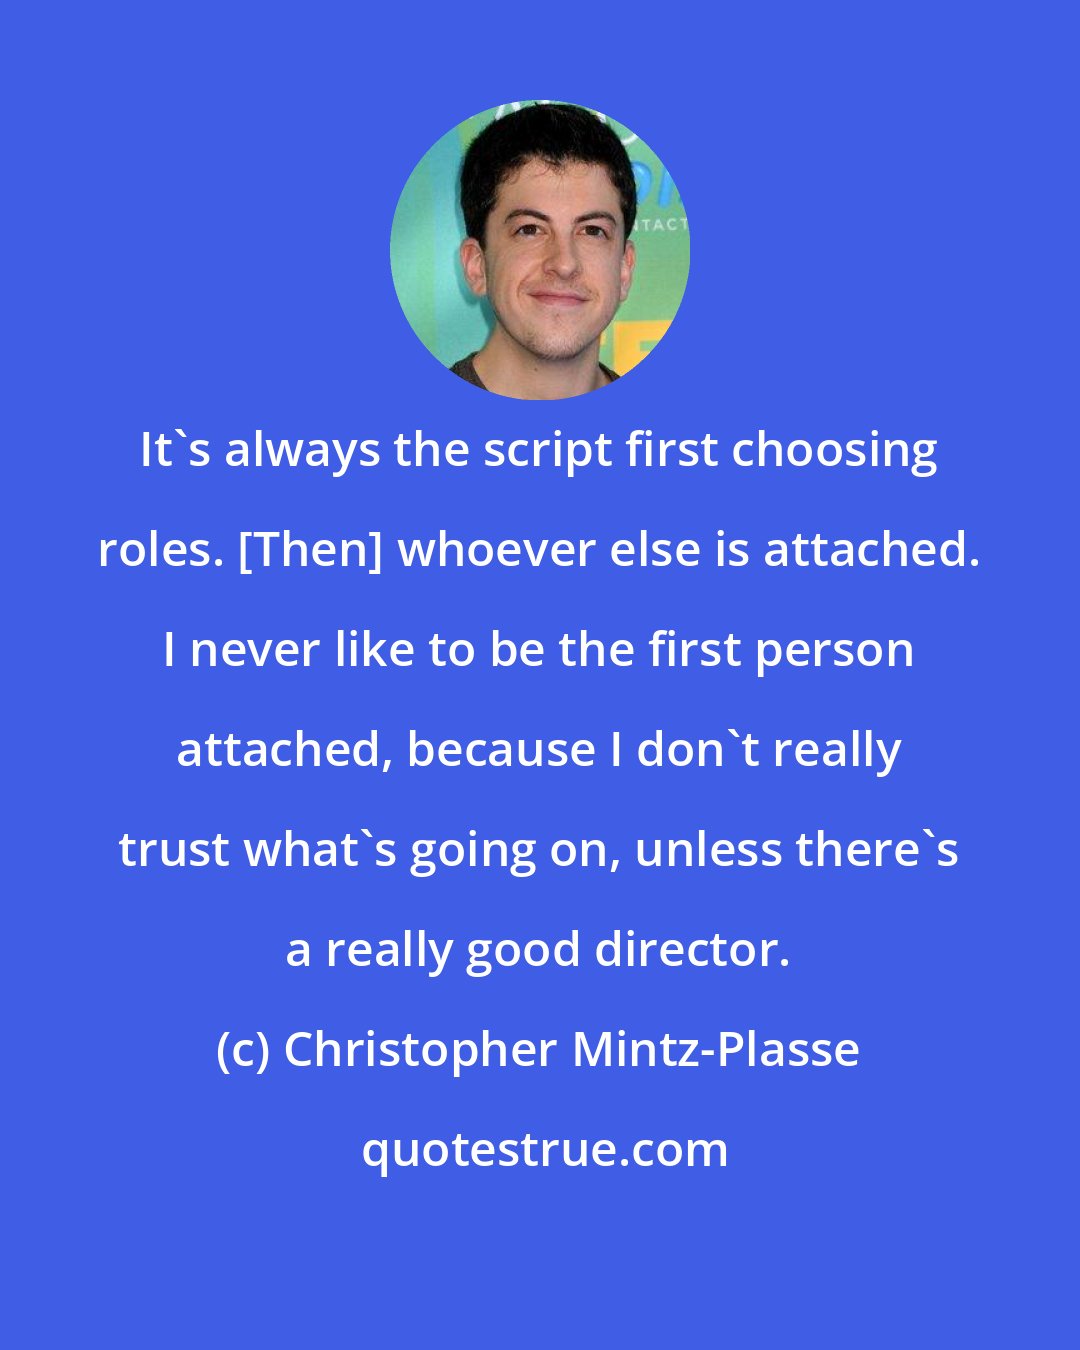 Christopher Mintz-Plasse: It's always the script first choosing roles. [Then] whoever else is attached. I never like to be the first person attached, because I don't really trust what's going on, unless there's a really good director.